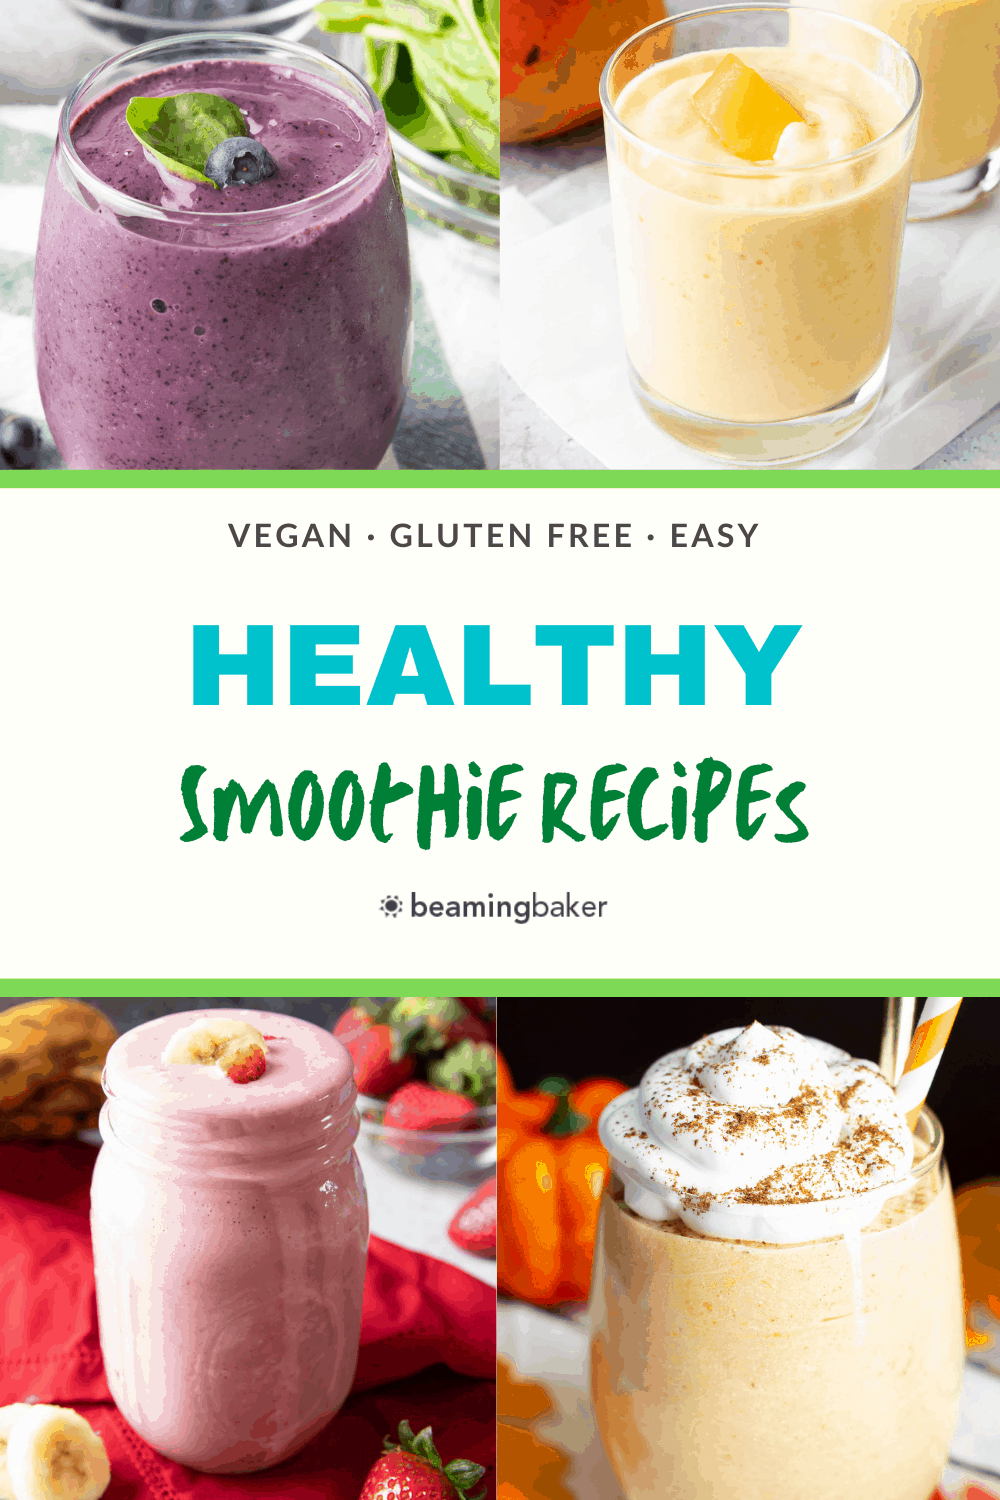 Good ‘n Healthy Smoothie Recipes!: we’ve gathered all of our favorite healthy smoothie recipes all in one place: from banana smoothies to strawberry smoothies ‘n more. Check out deliciously good smoothie recipes! #Smoothie #Smoothies #Recipe #Healthy | Recipes at BeamingBaker.com